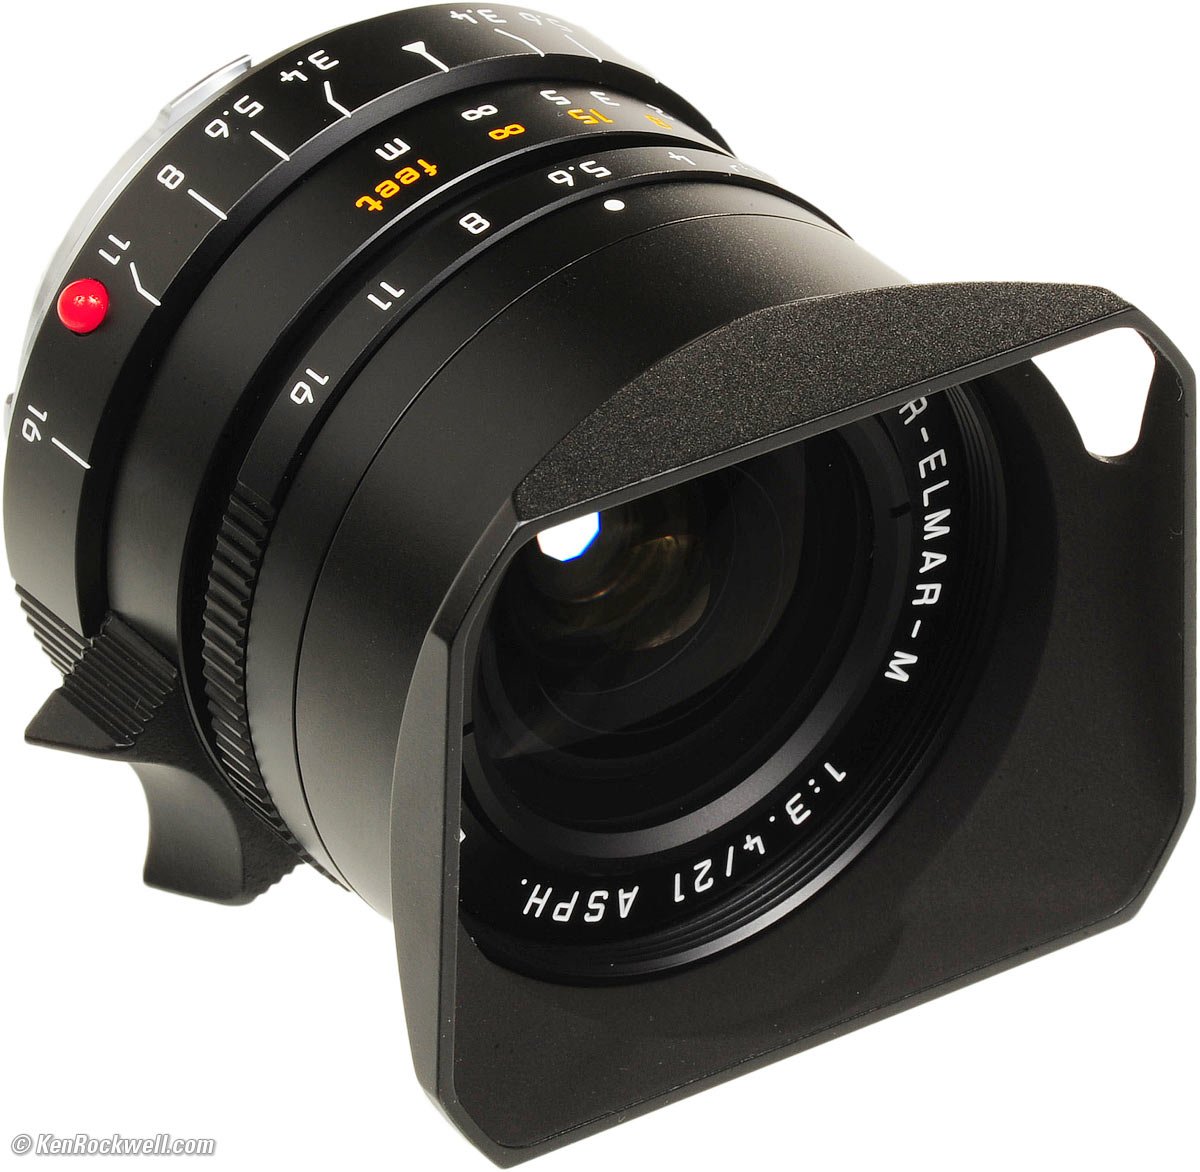 LEICA 21mm f/3.4 ASPH Review